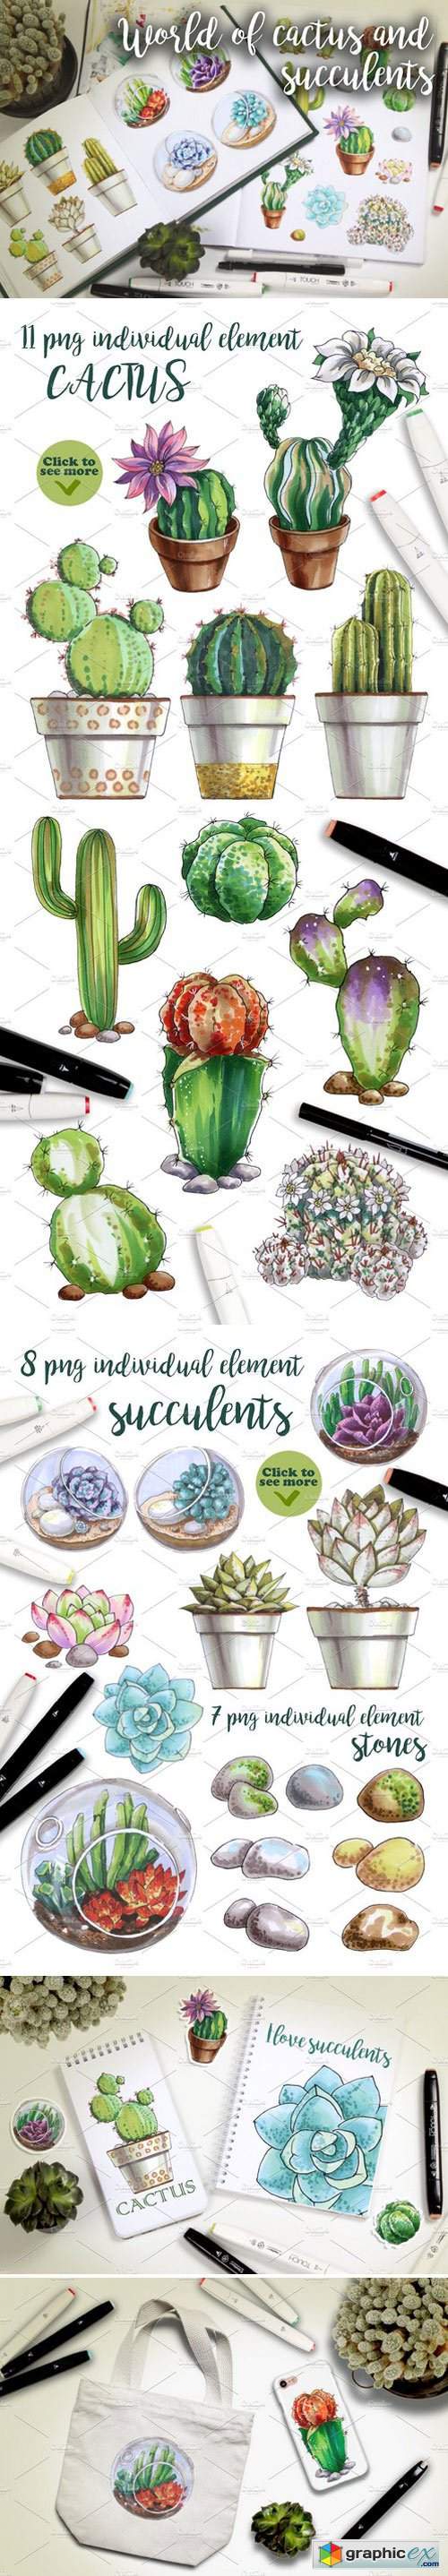 World of cactus and succulents